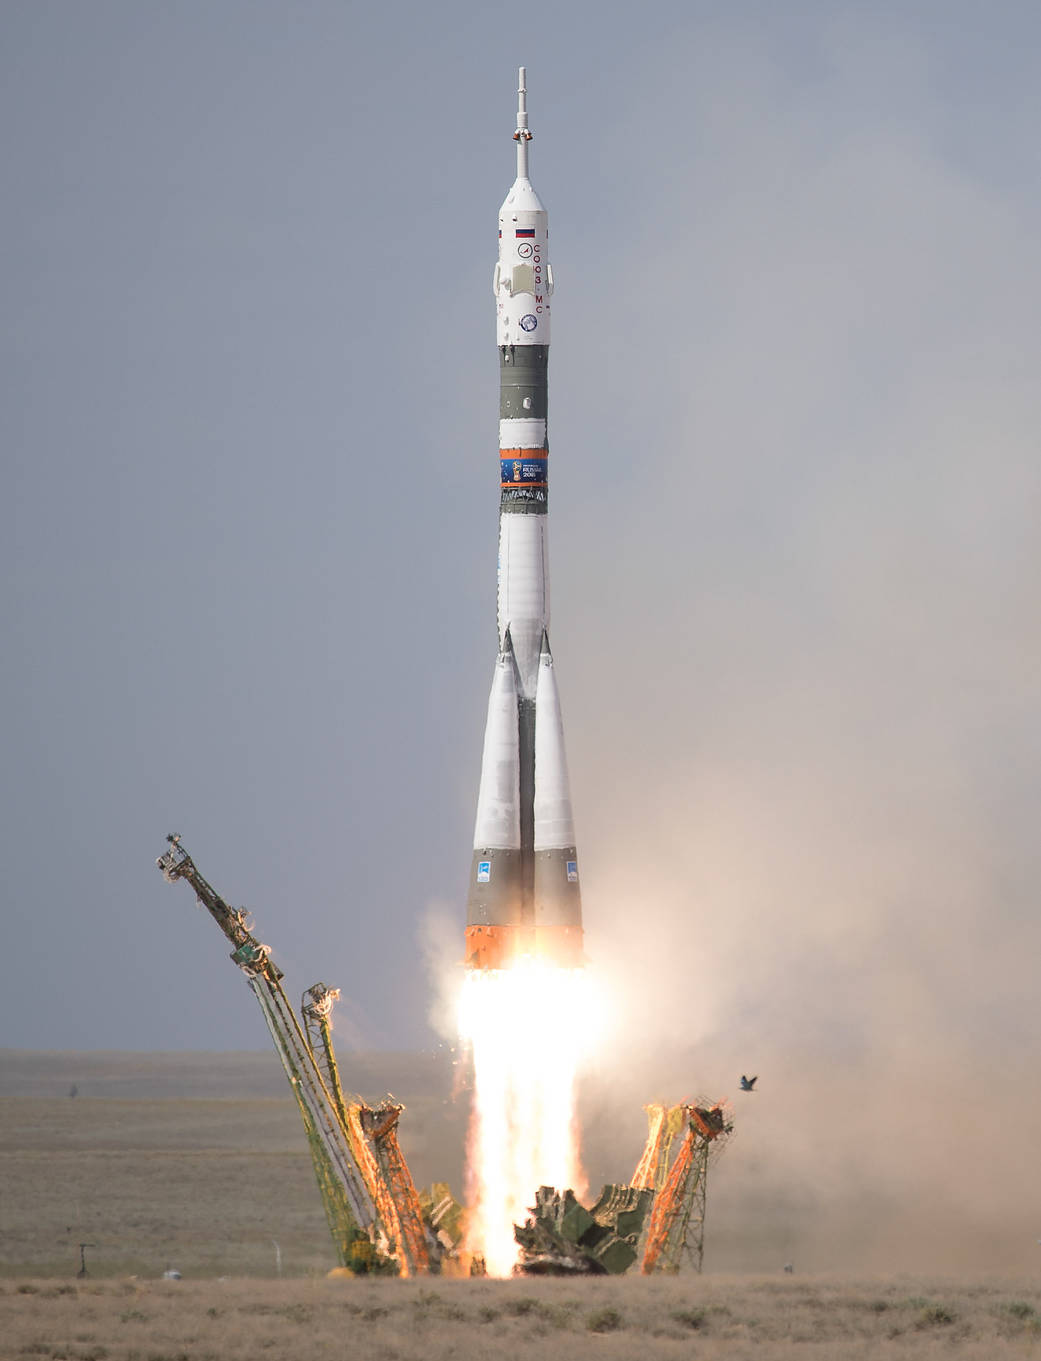 The Soyuz MS-09 rocket is launched